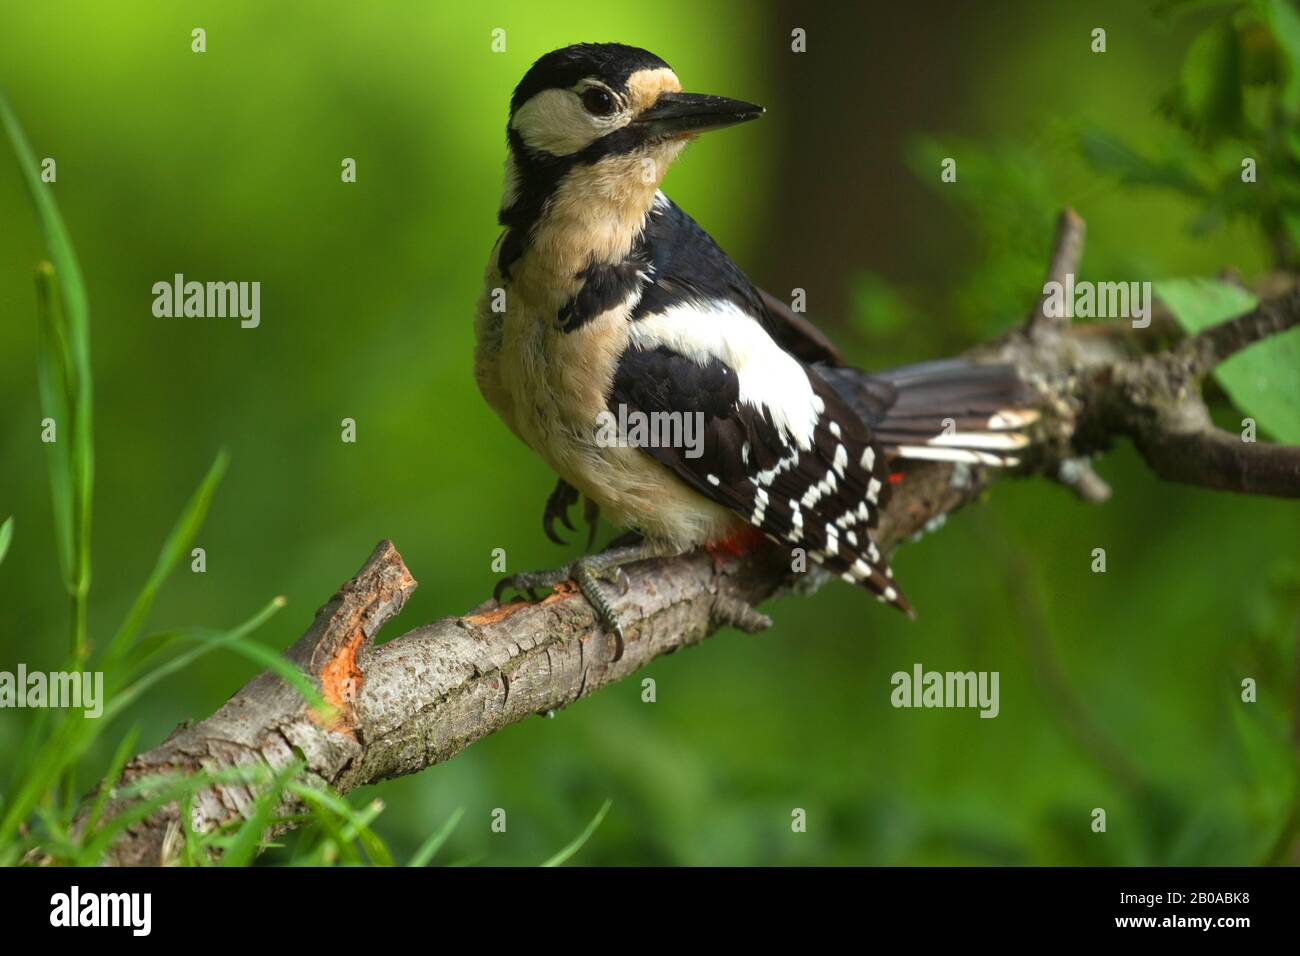 Great spotted woodpecker (Picoides major, Dendrocopos major), sits on a branch, Germany, North Rhine-Westphalia Stock Photo